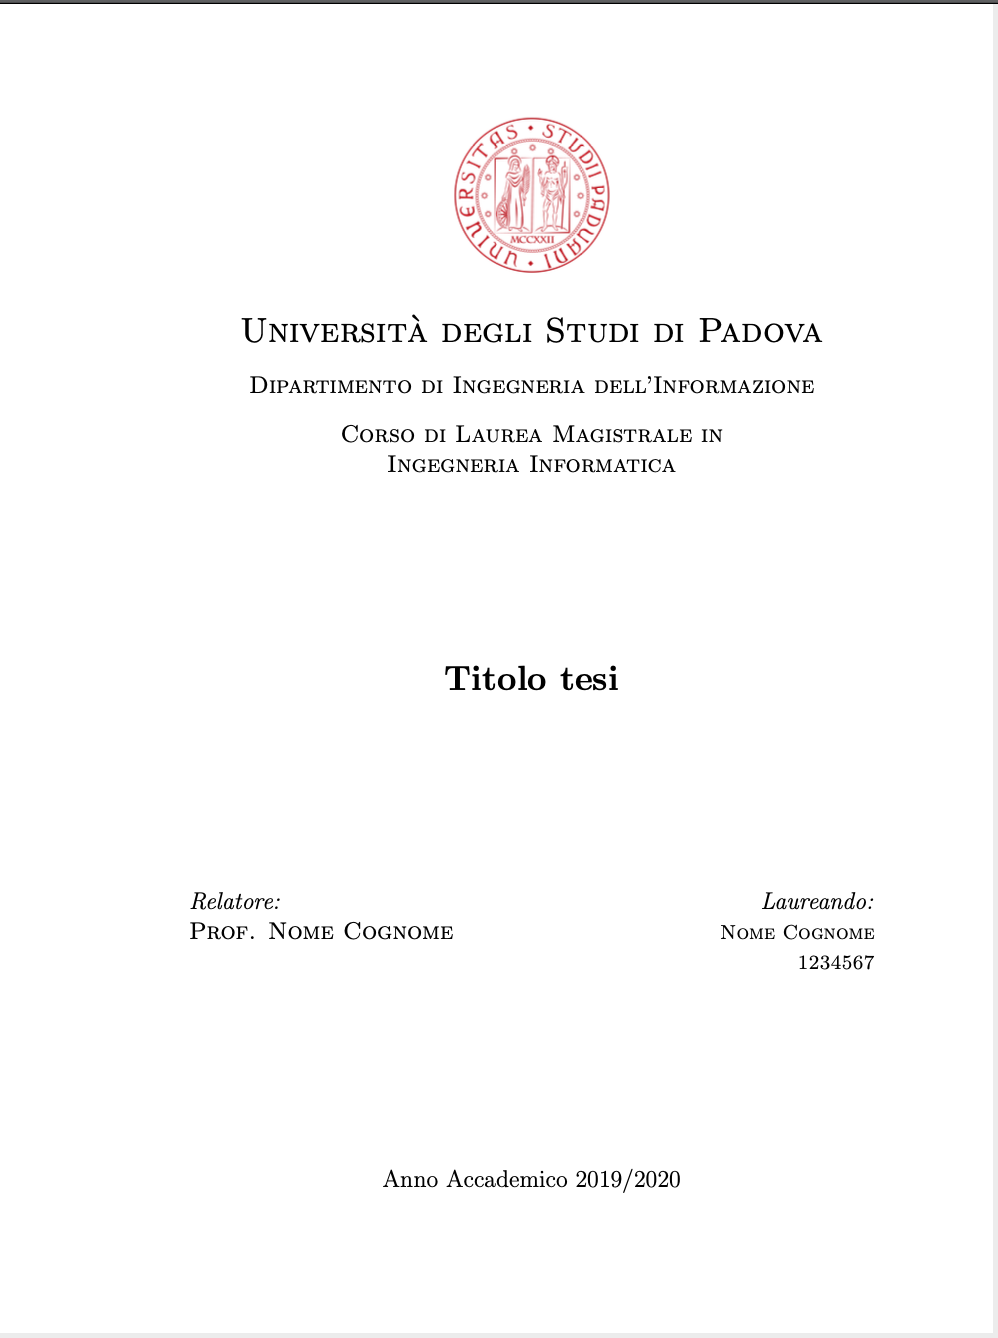 unipd thesis